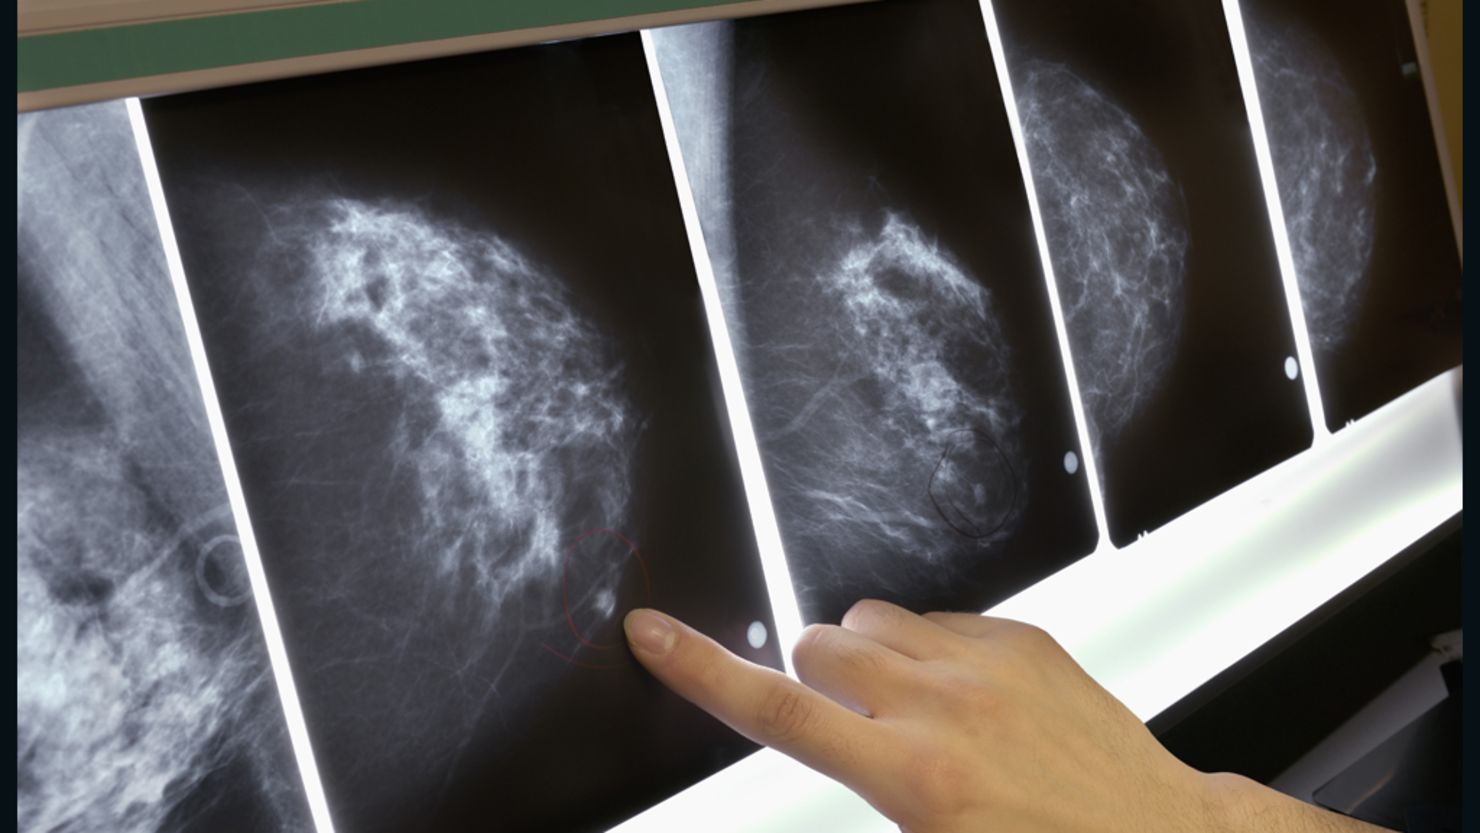 A recent breast cancer symposium presented new treatment findings.